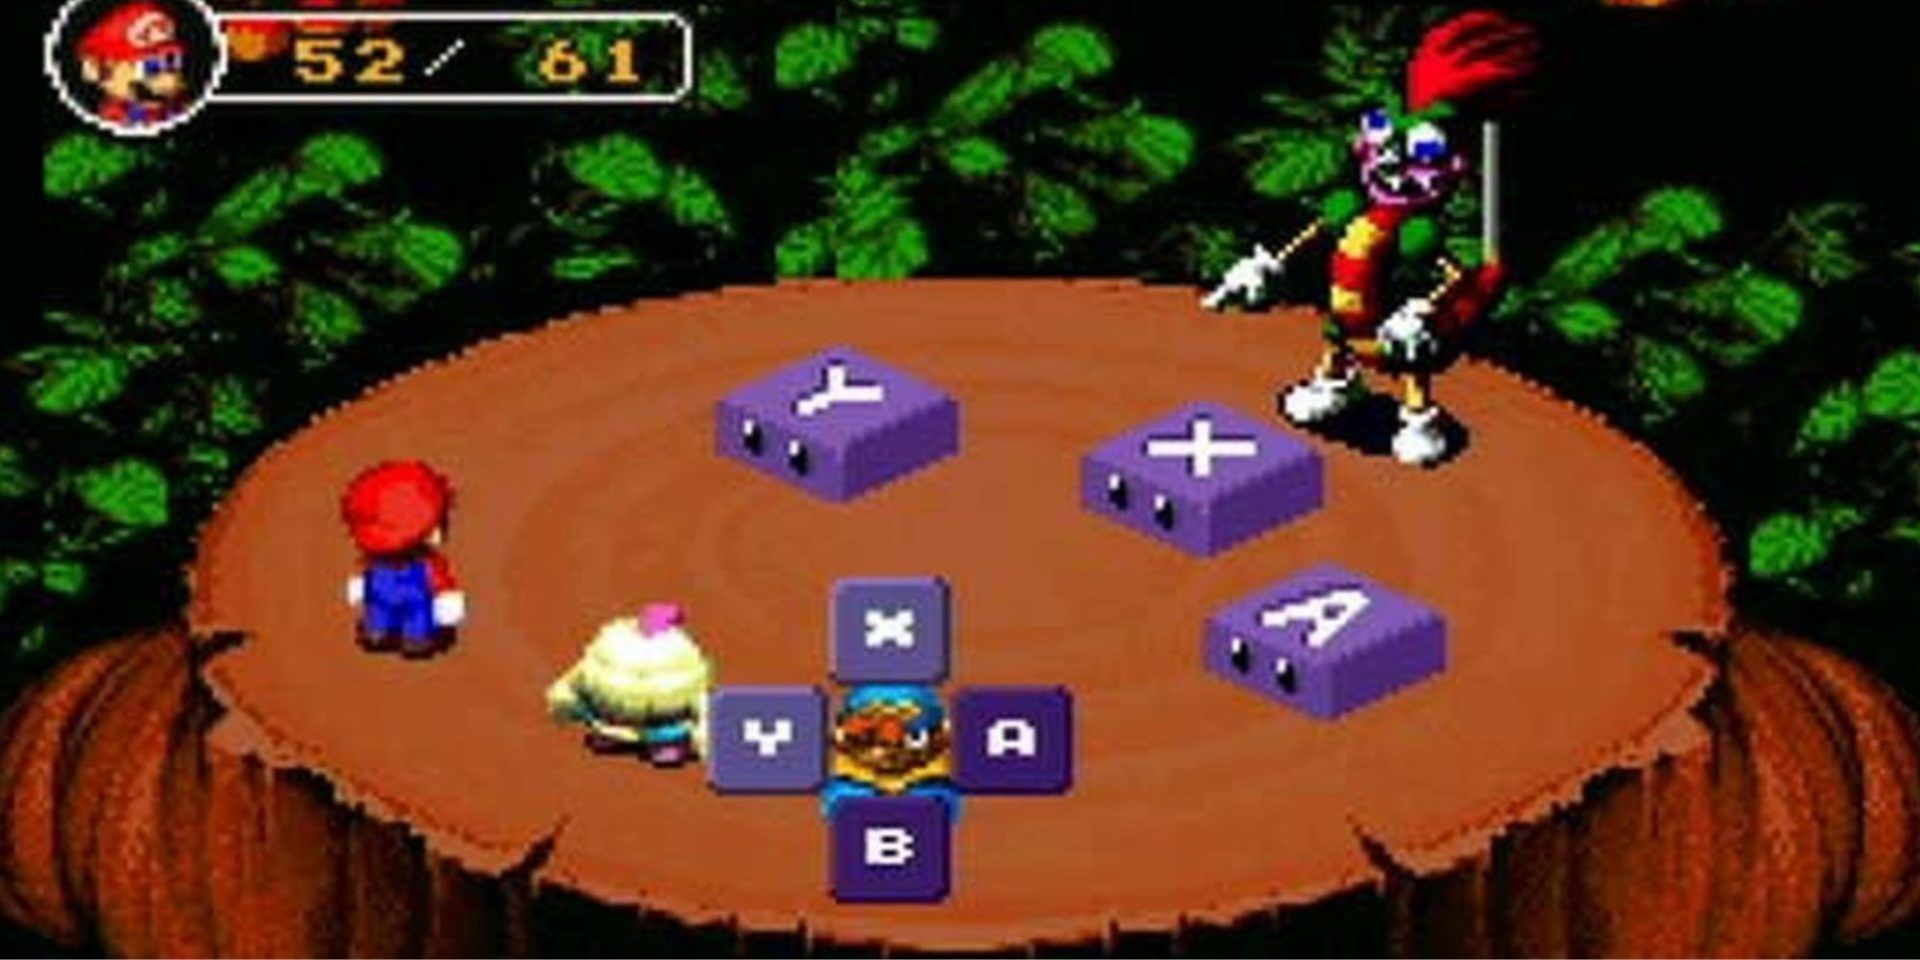 Mario, Geno, and Mallow do battle against Bowyer. 